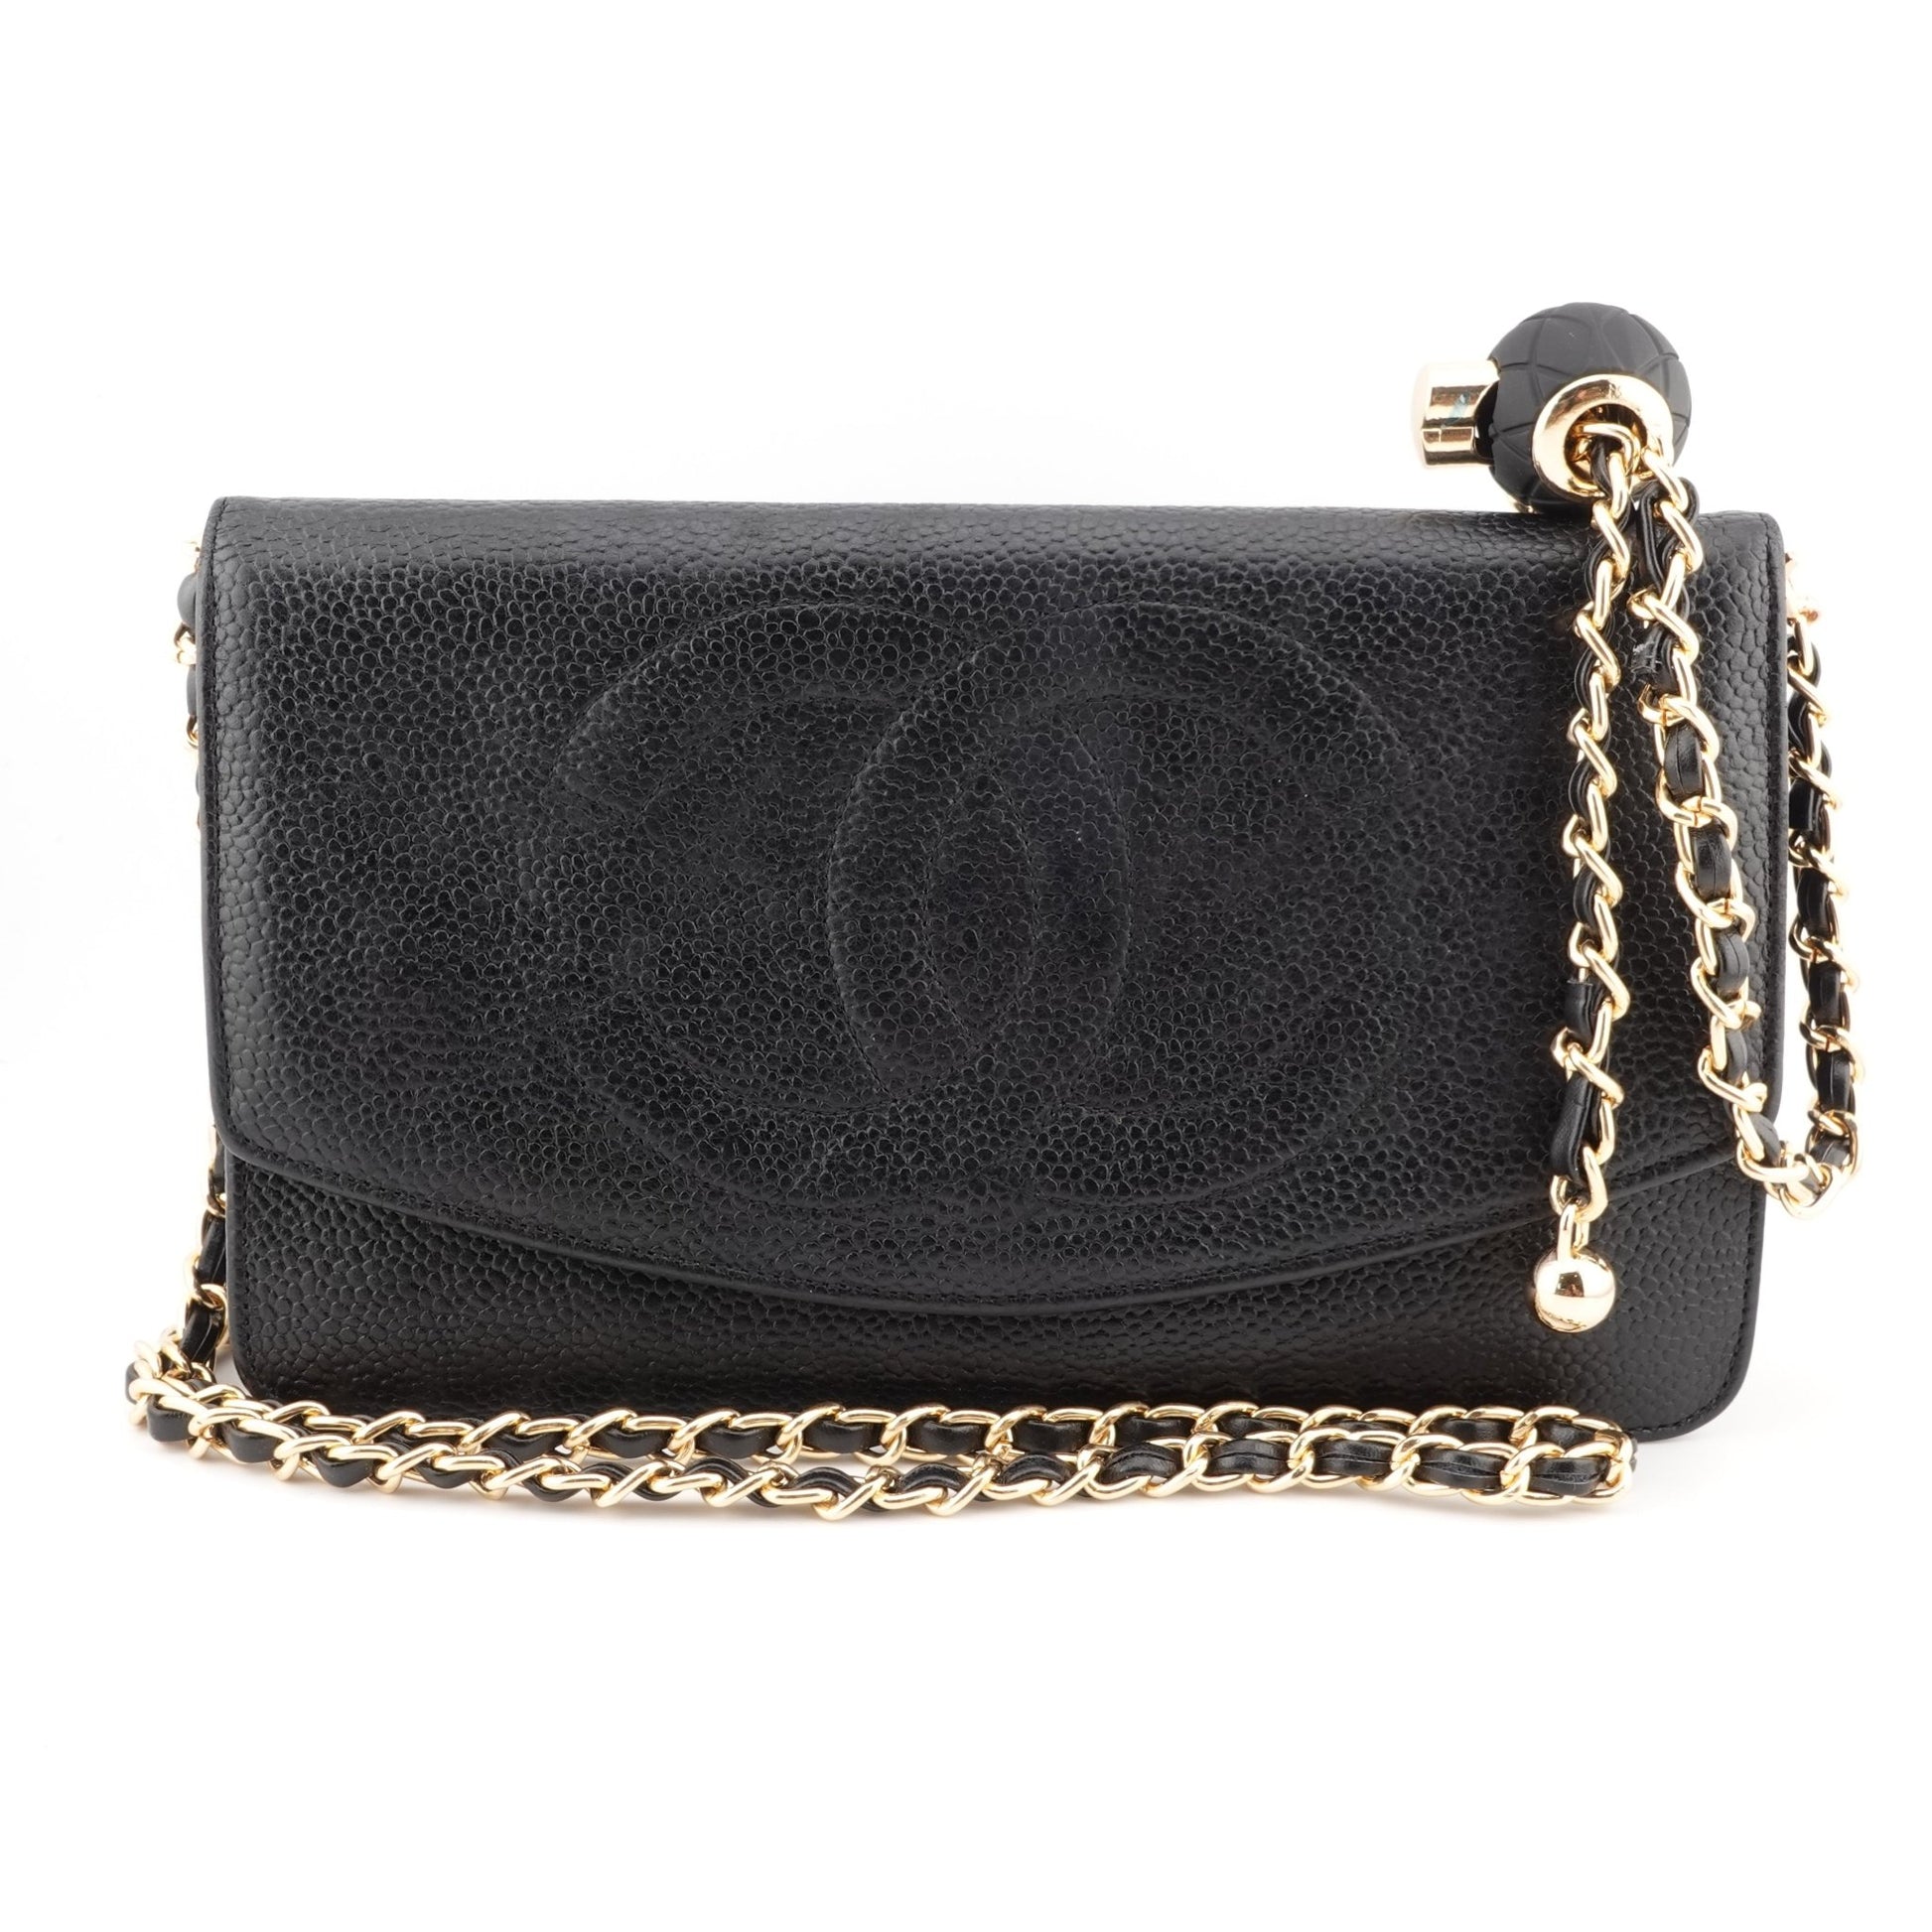 CHANEL Caviar Leather Timeless Clutch on Chain - Bag Envy